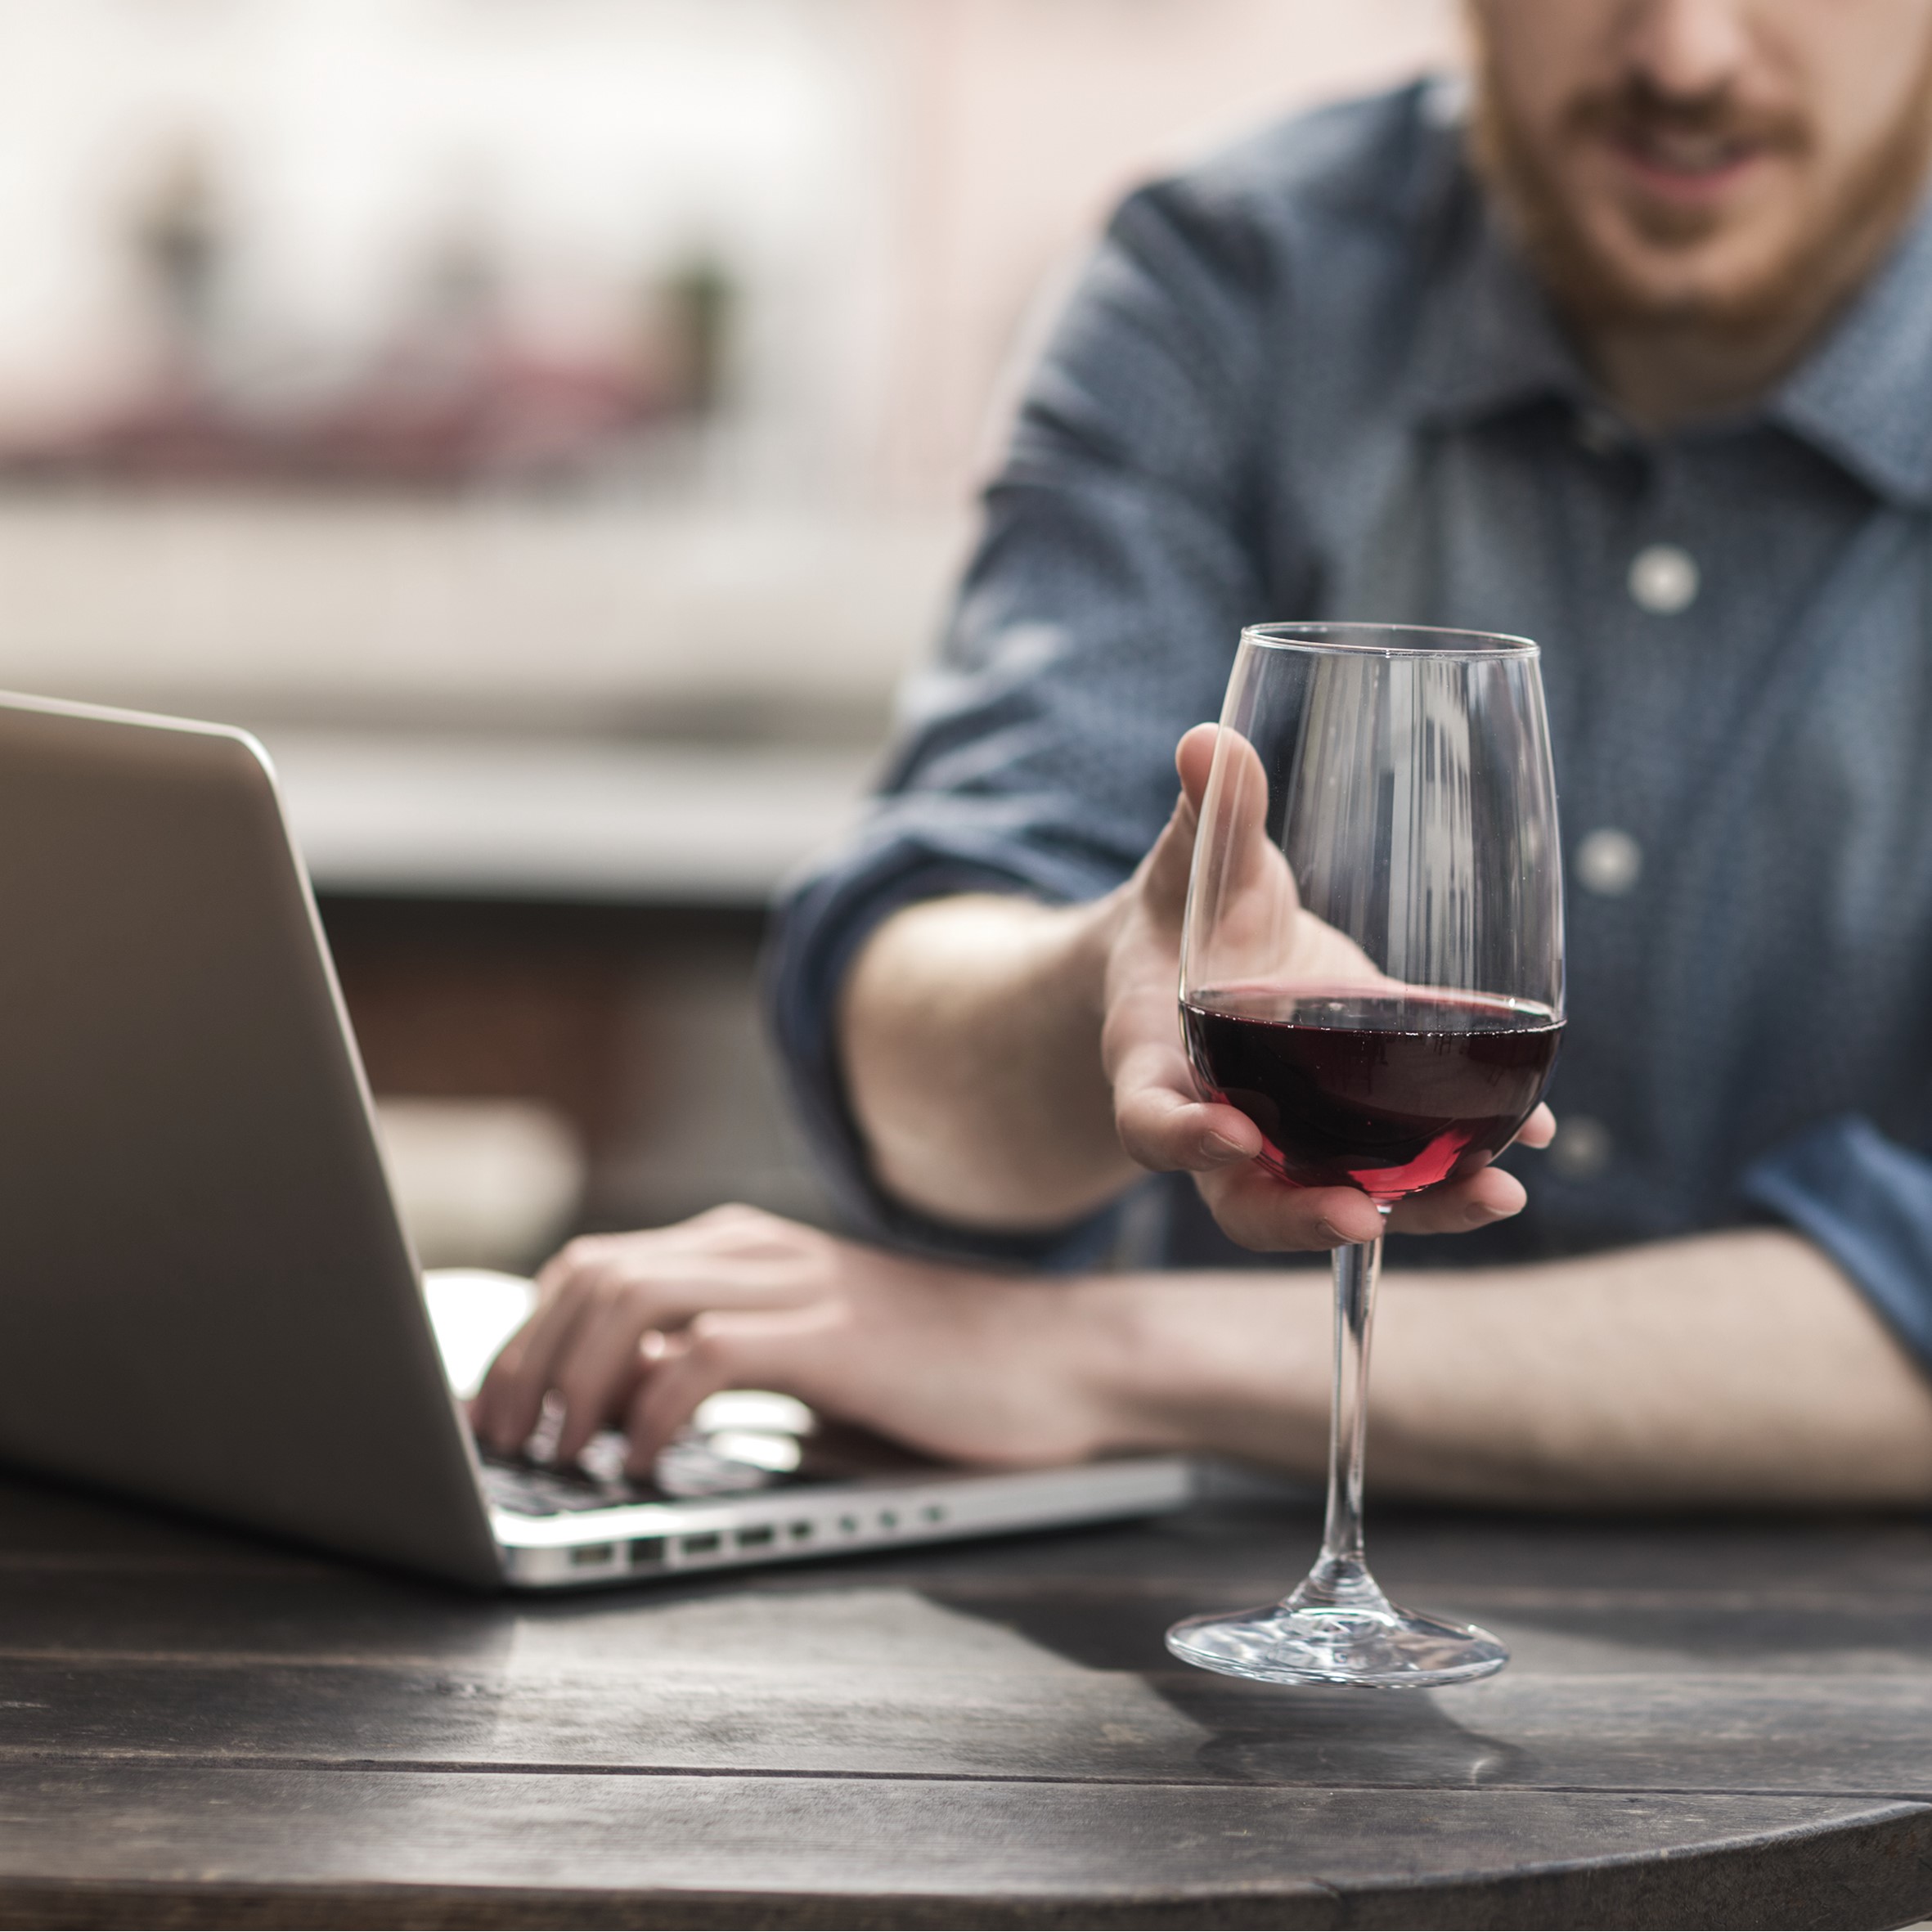 Brazil technology 2 - Key Triggers to Online Wine Purchasing